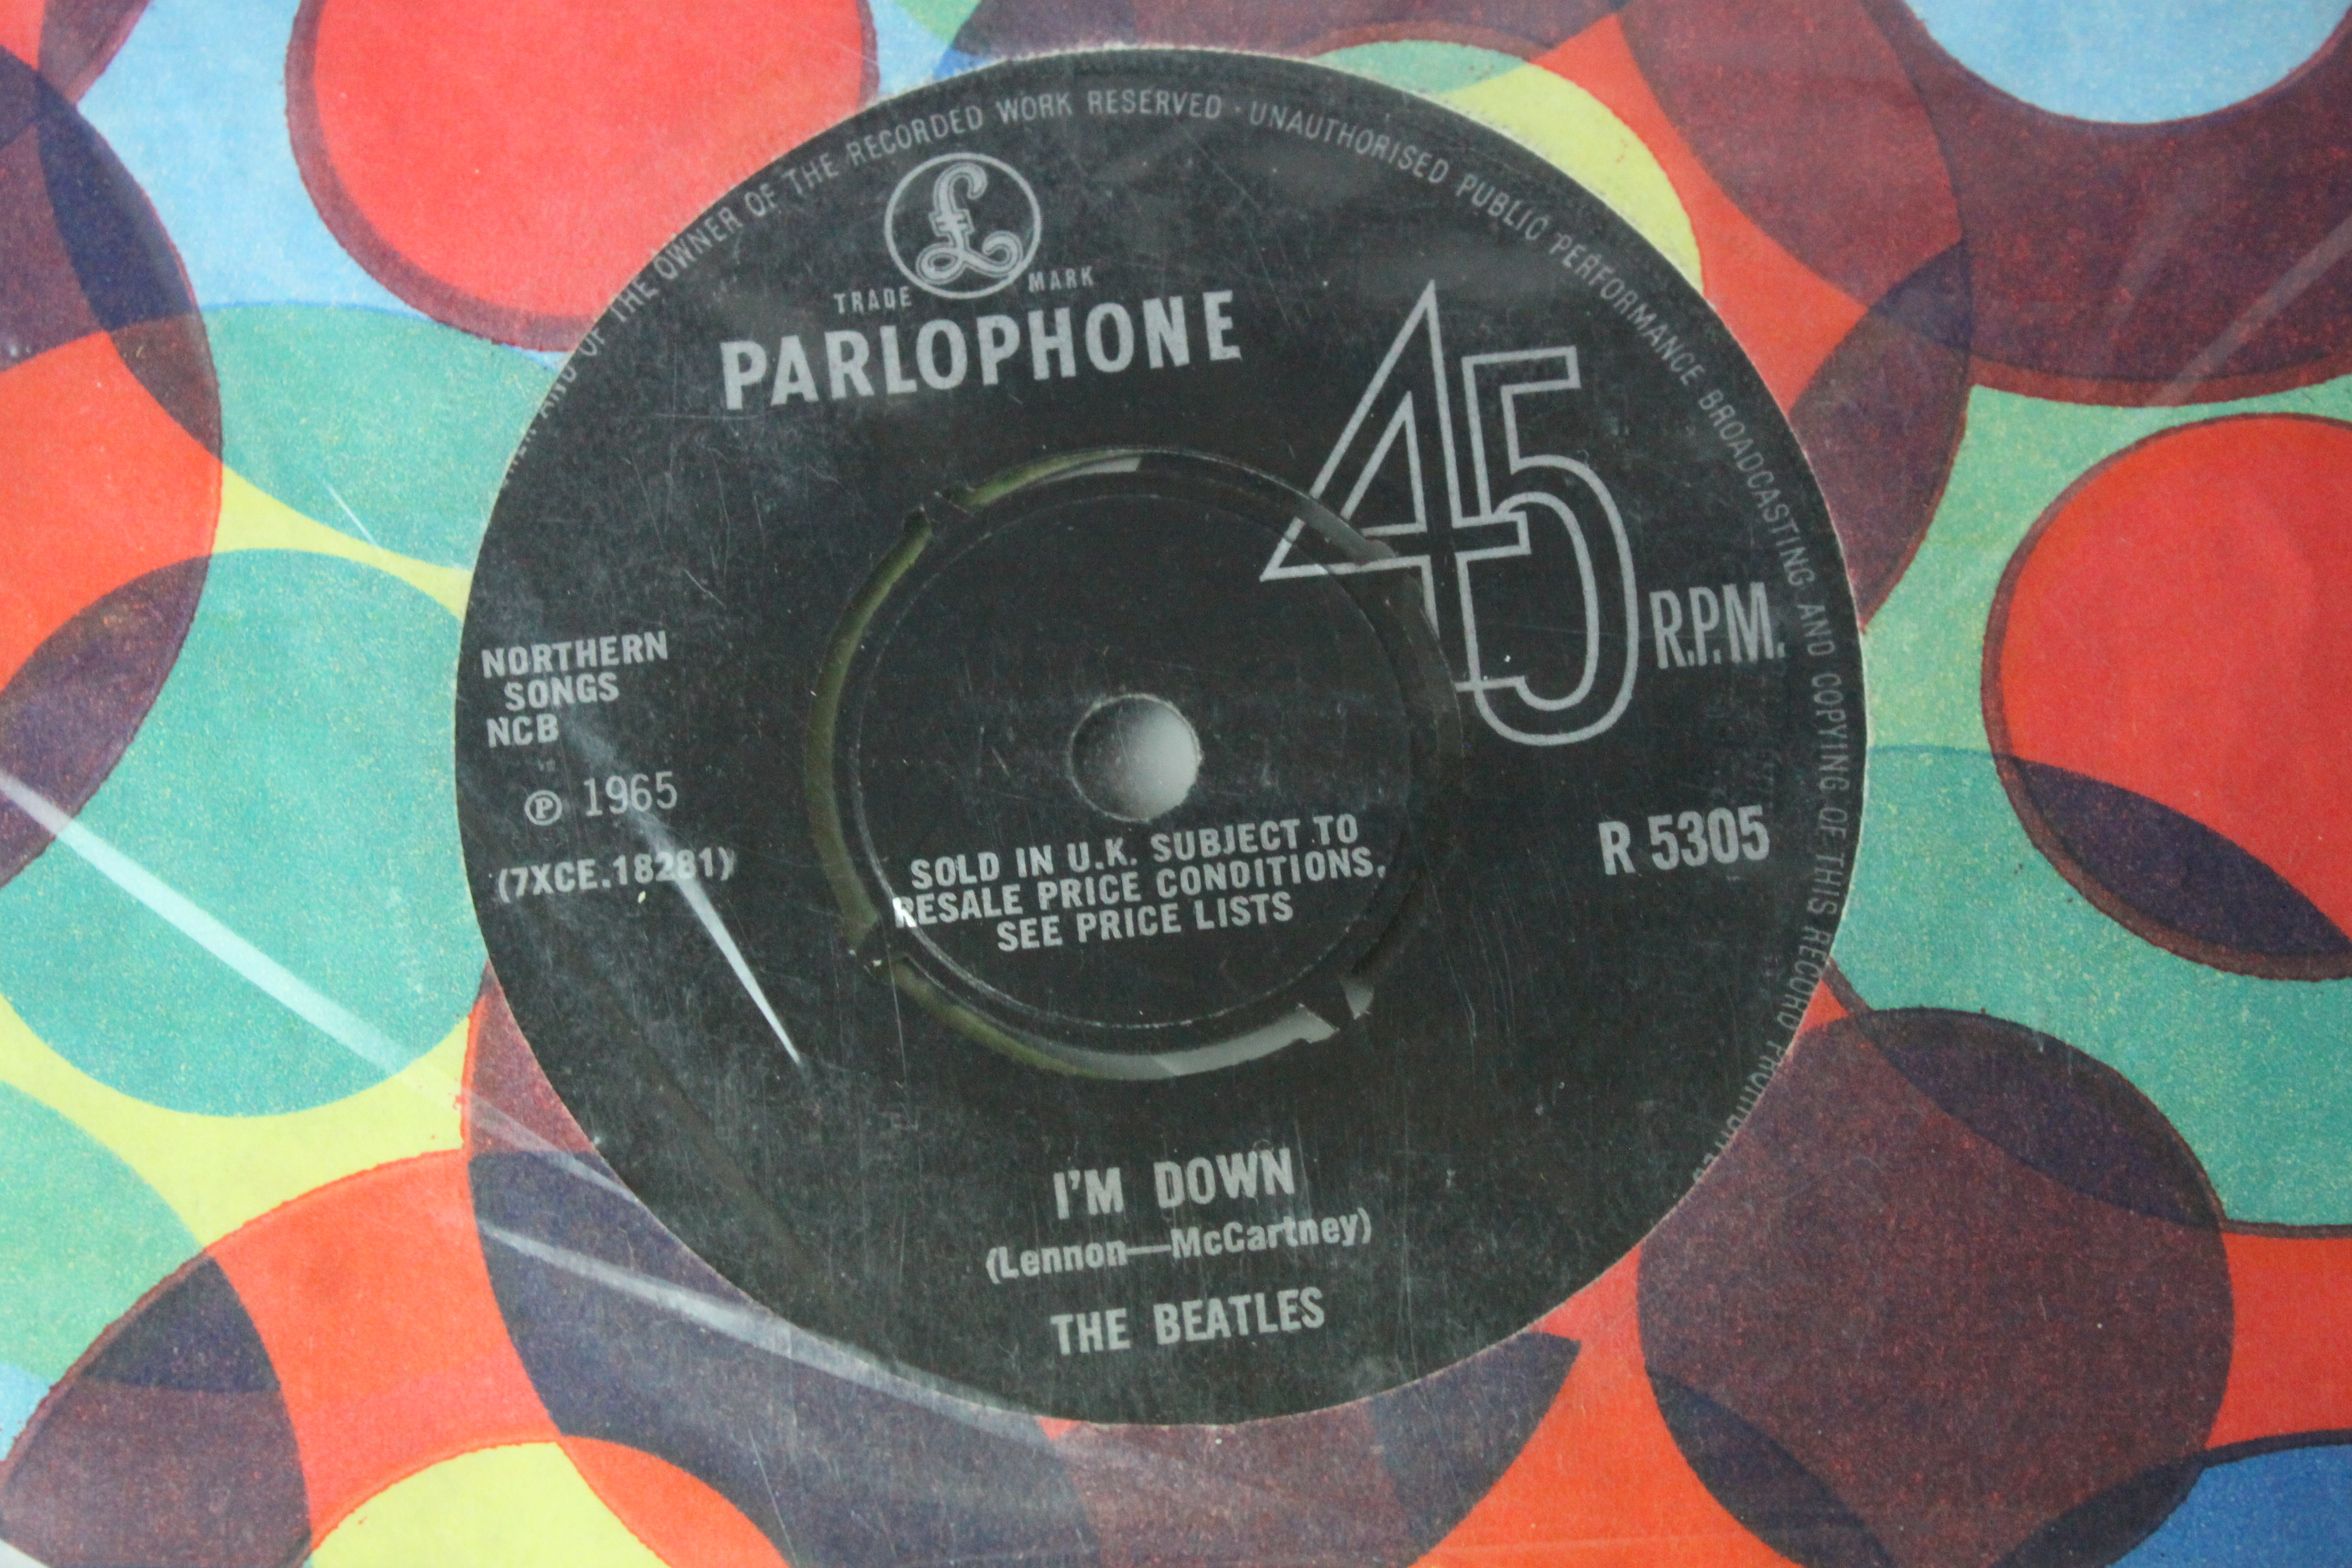 Vinyl - Approximately 40 The Beatles and related 45s, many with company sleeves, condition varies - Image 8 of 12